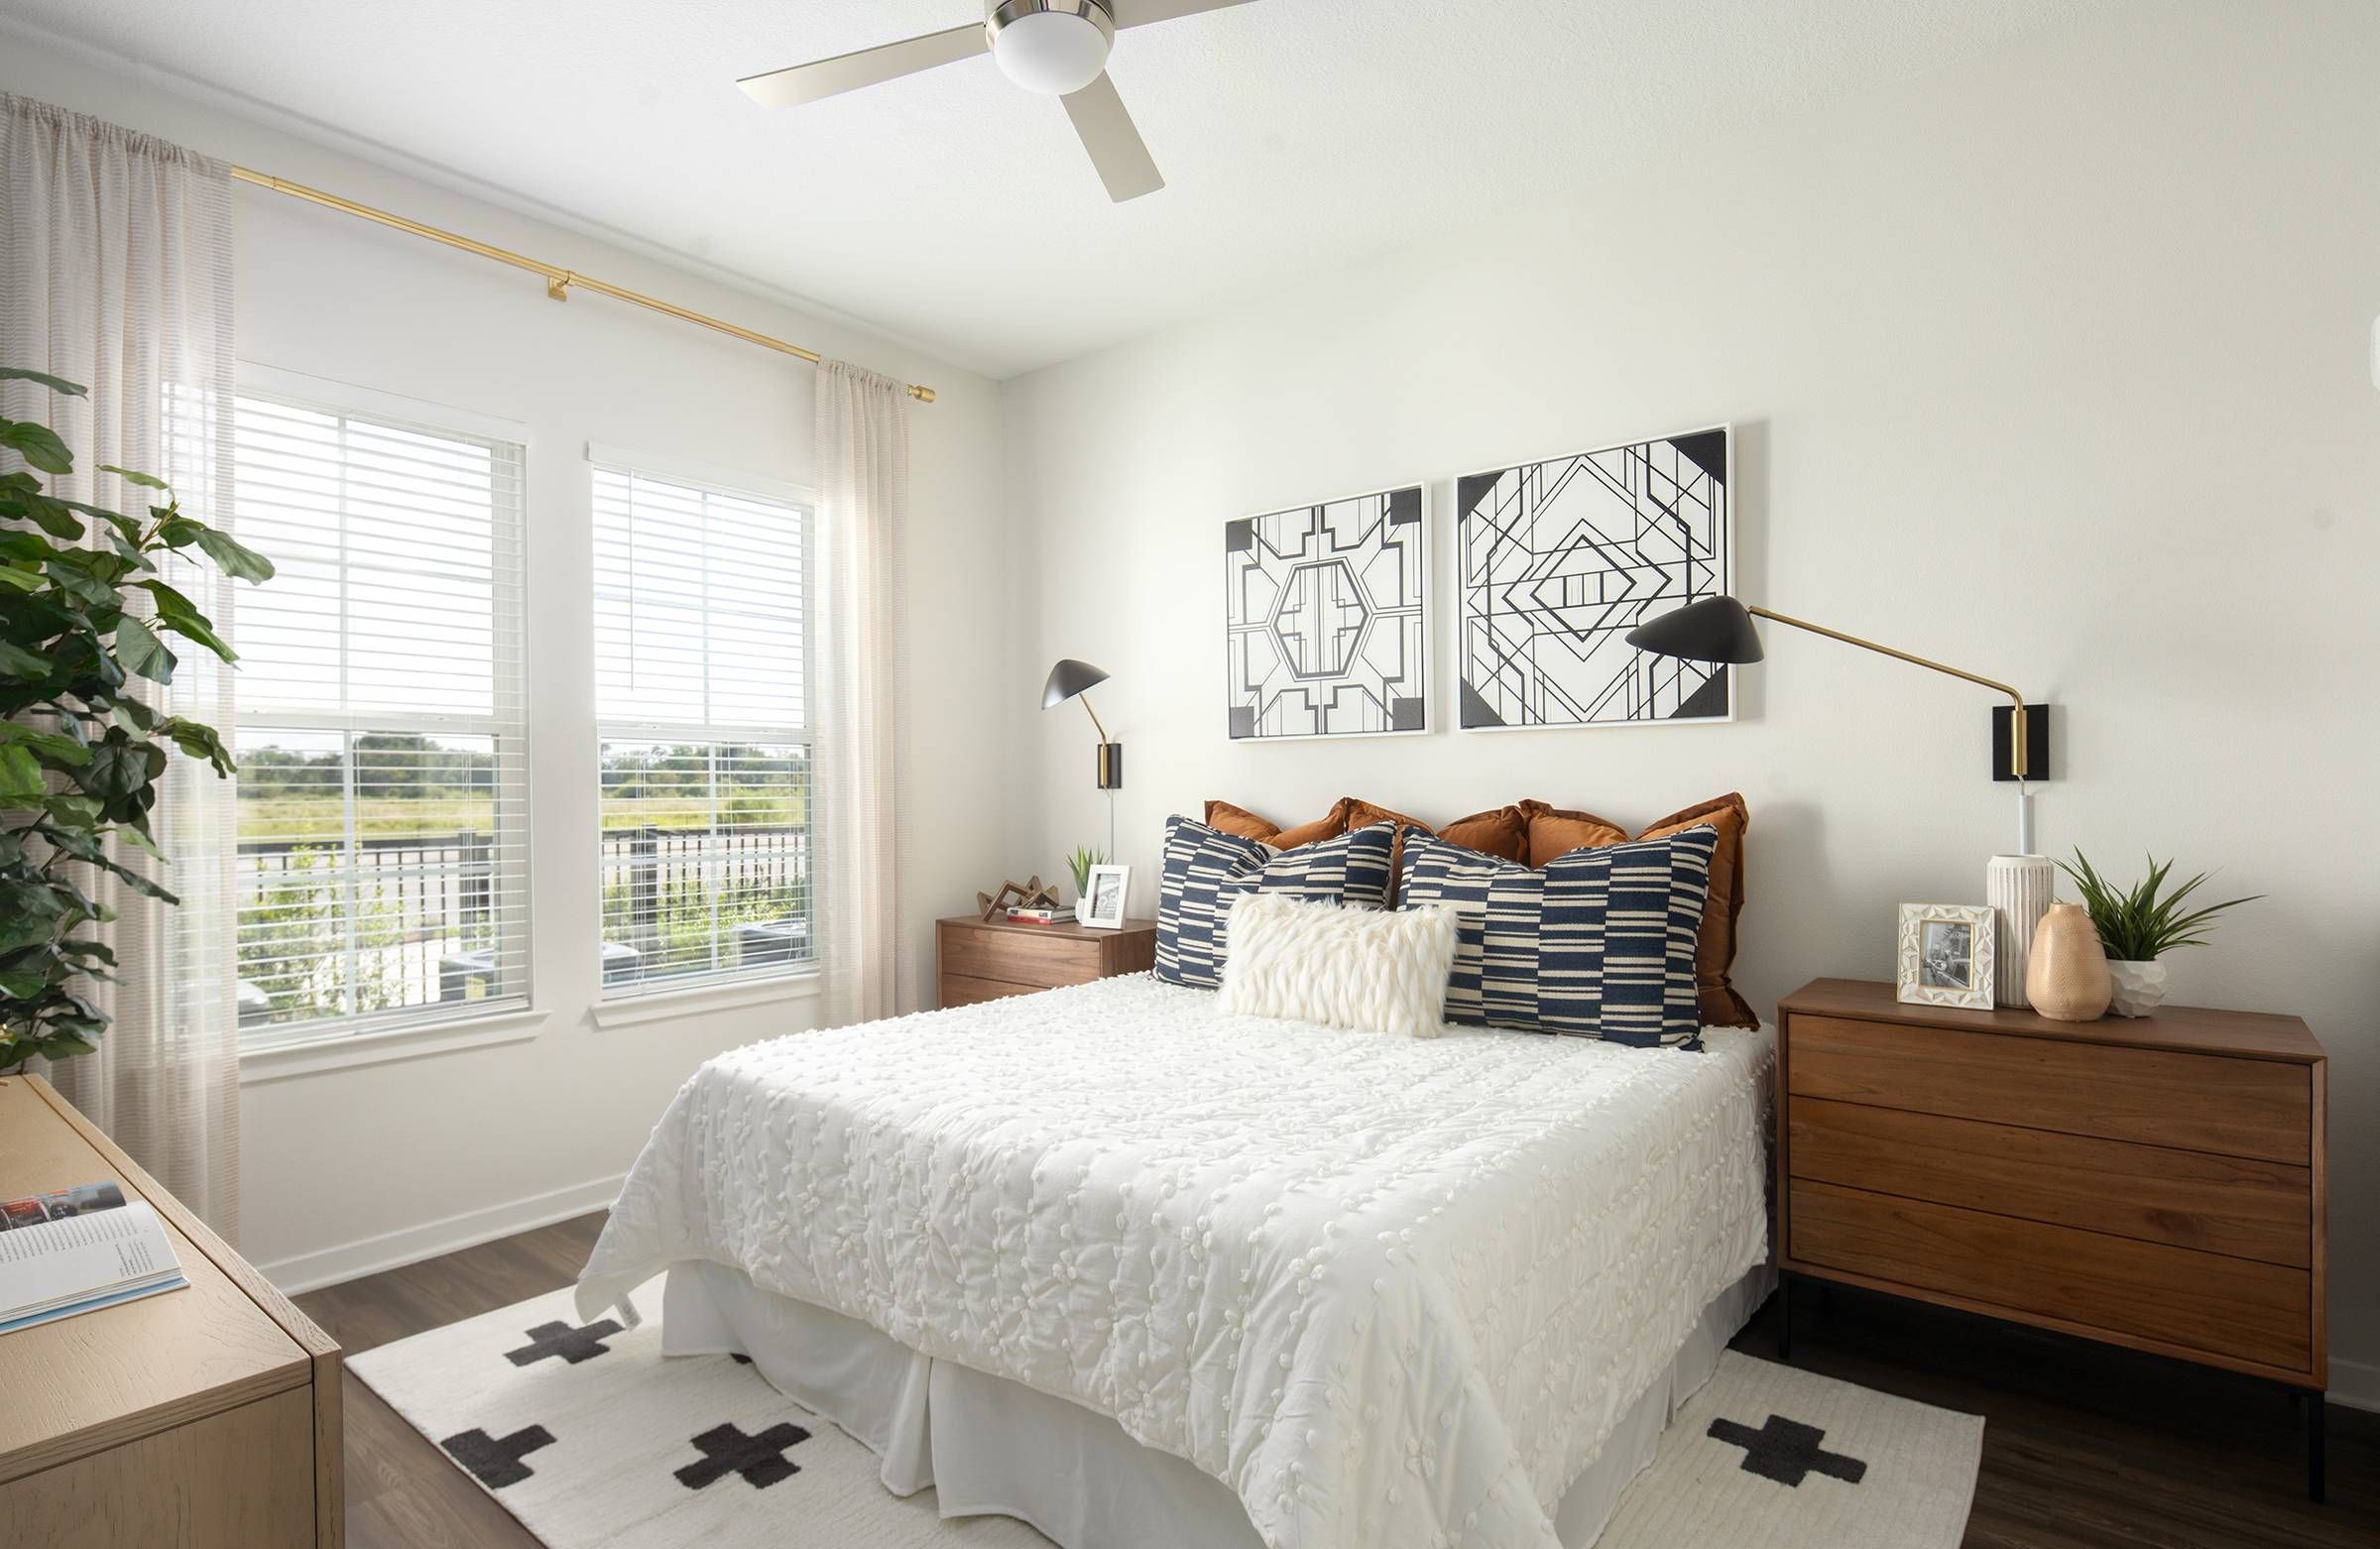 Alta Winter Garden's two-bedroom model presents a well-appointed bedroom with crisp white bedding and tasteful wall art.